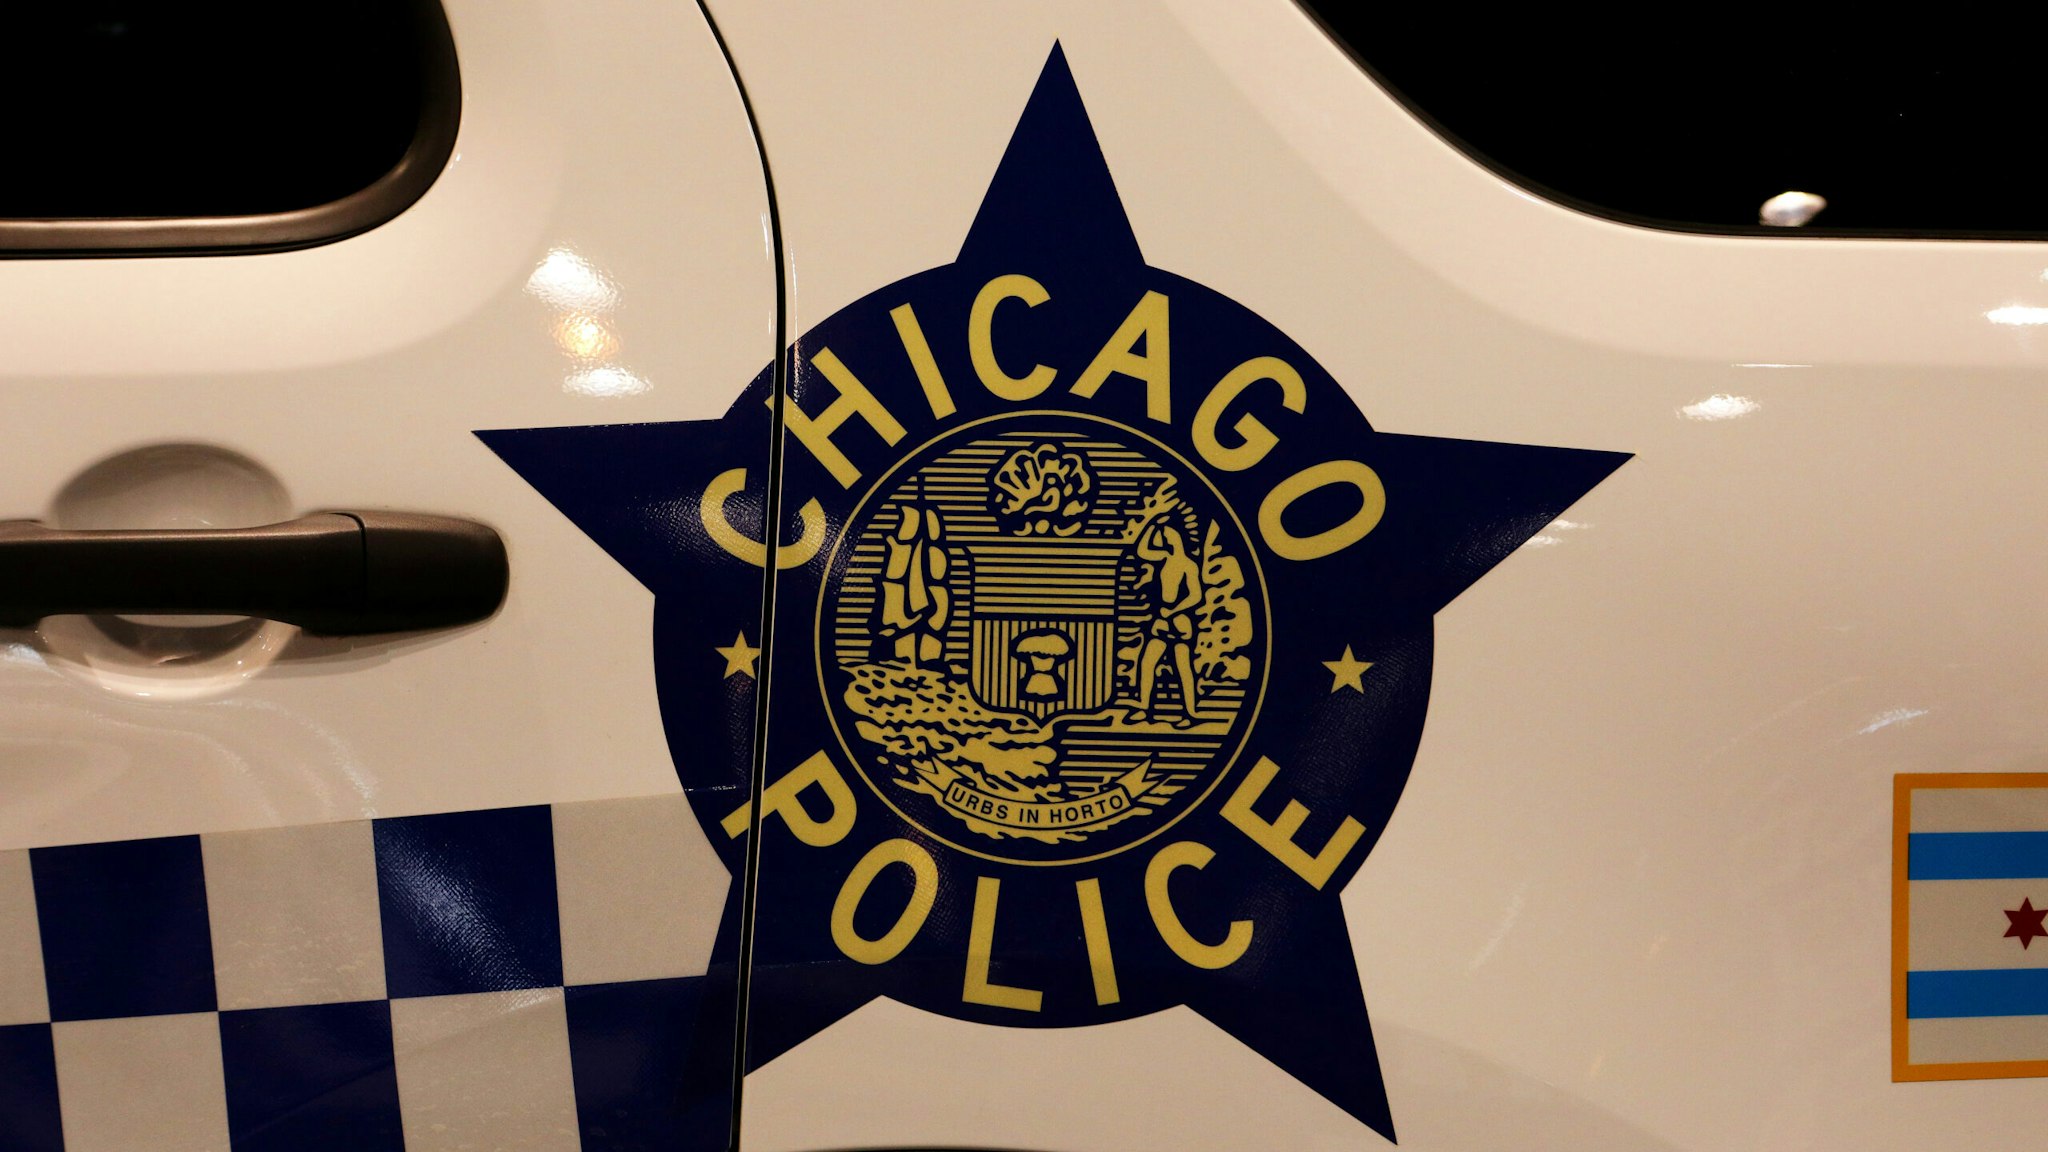 HICAGO - FEBRUARY 06: A Chicago Police decal on a Chicago Police vehicle is on display at the 112th Annual Chicago Auto Show at McCormick Place in Chicago, Illinois on February 6, 2020. (Photo By Raymond Boyd/Getty Images)"n